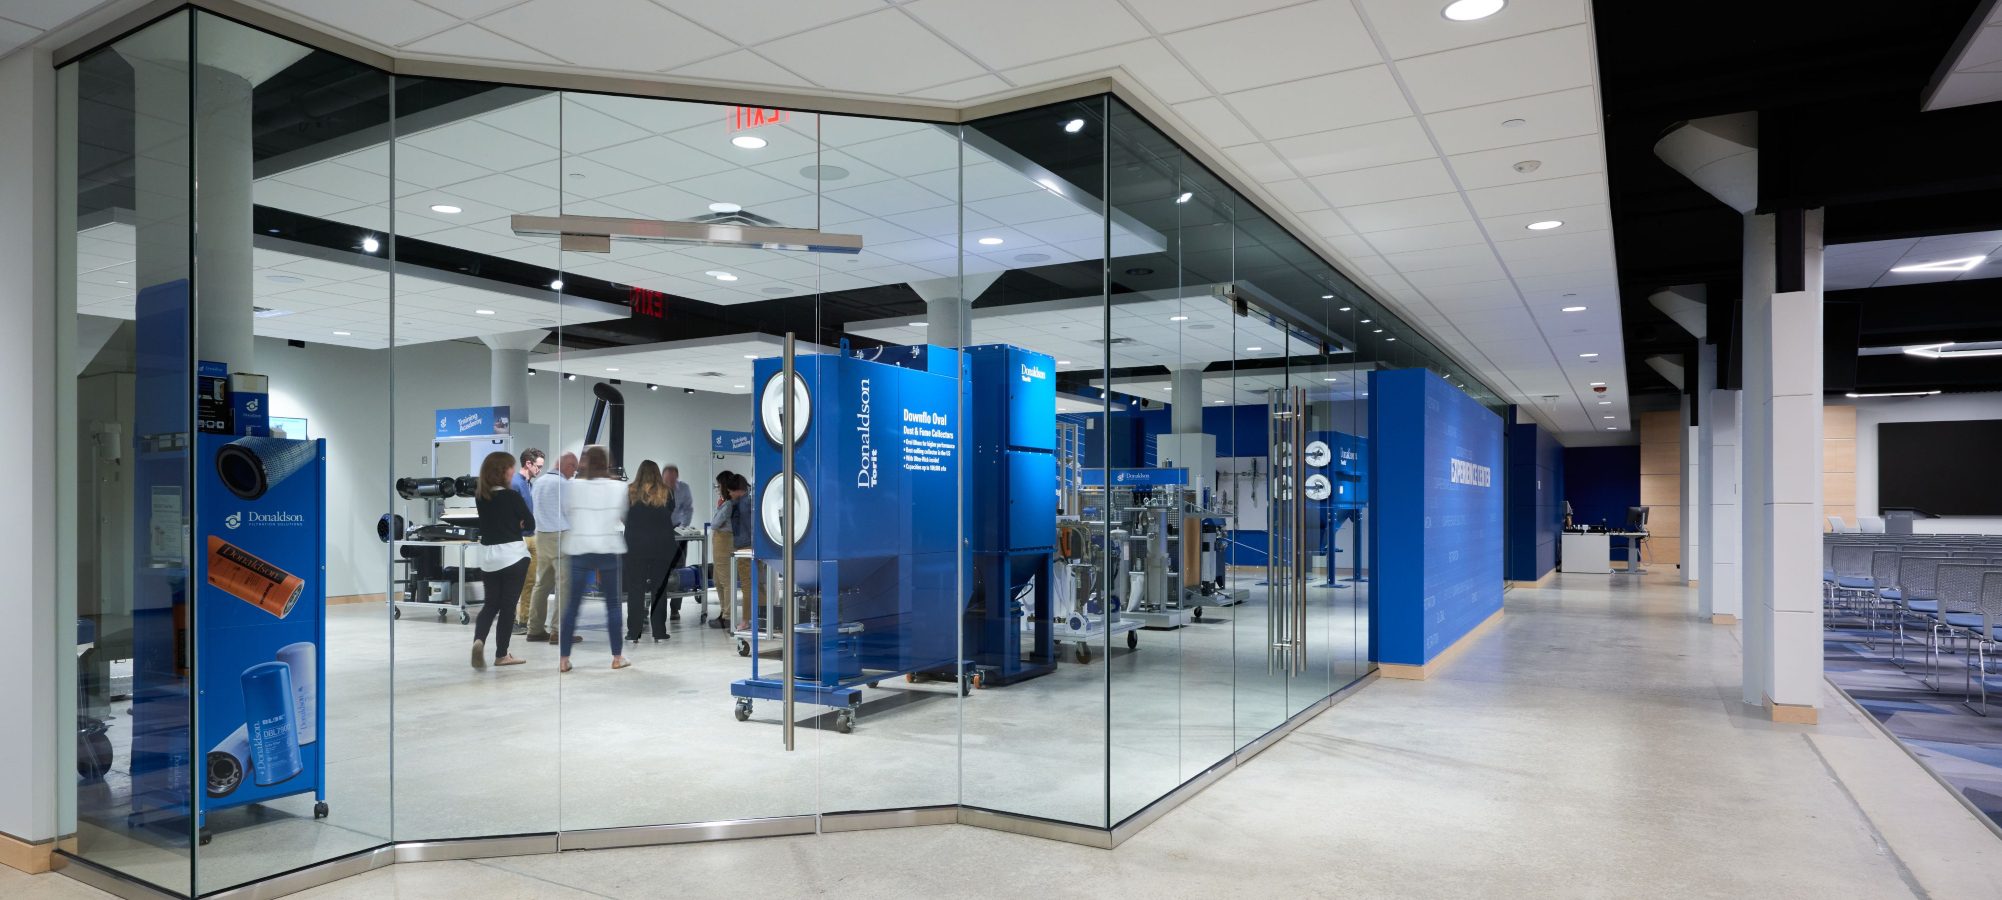 Corporate training area with blue signage and glass wall